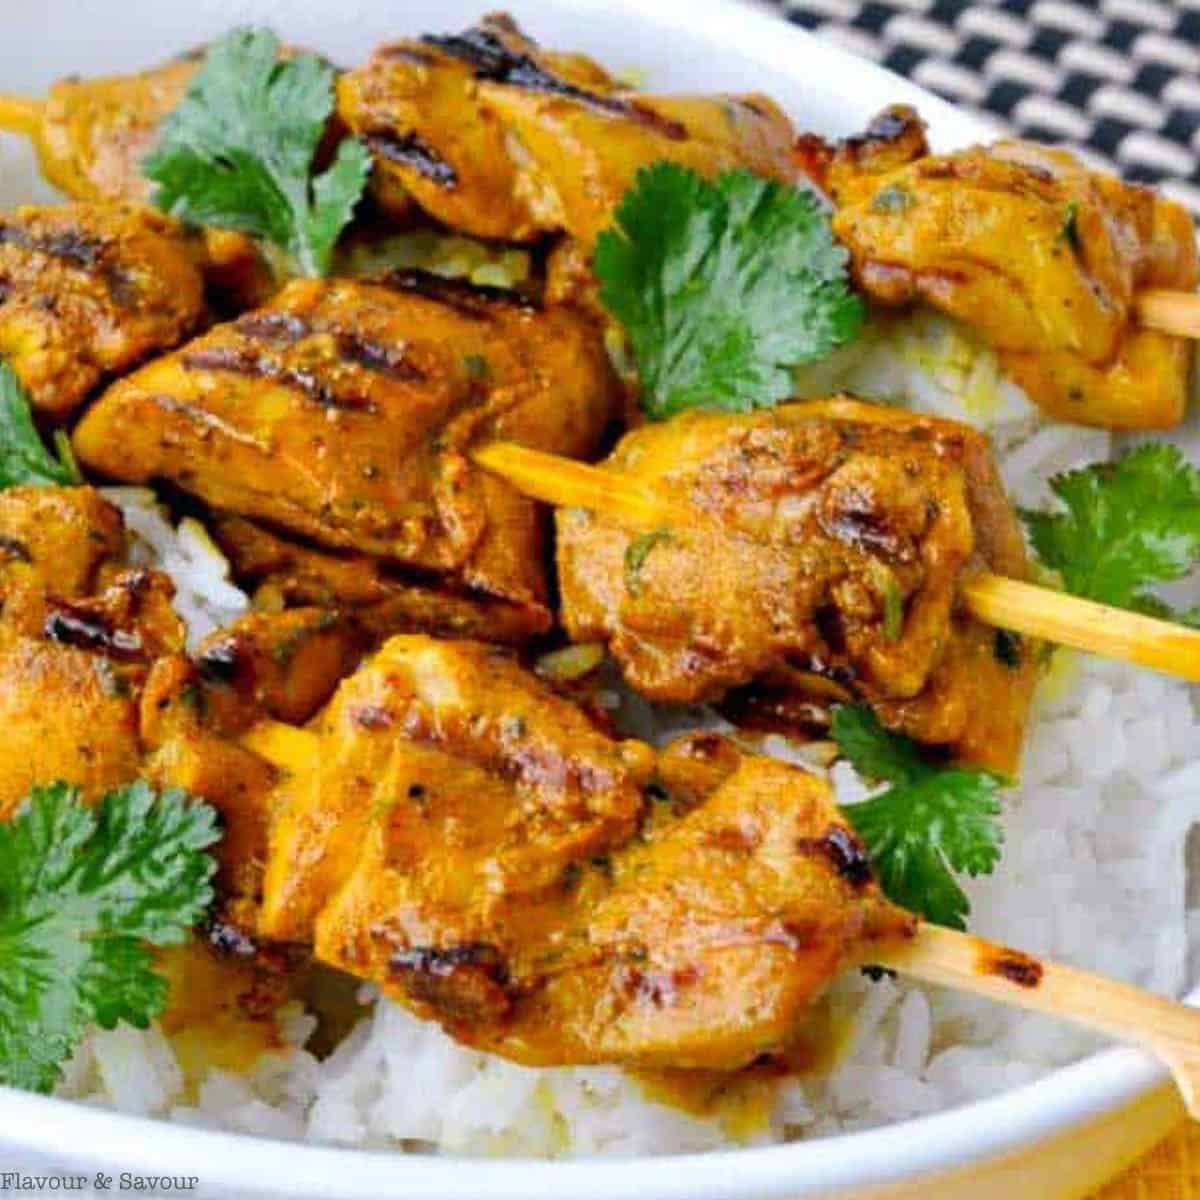 grilled turmeric chicken kabobs on wooden skewers with cilantro leaves